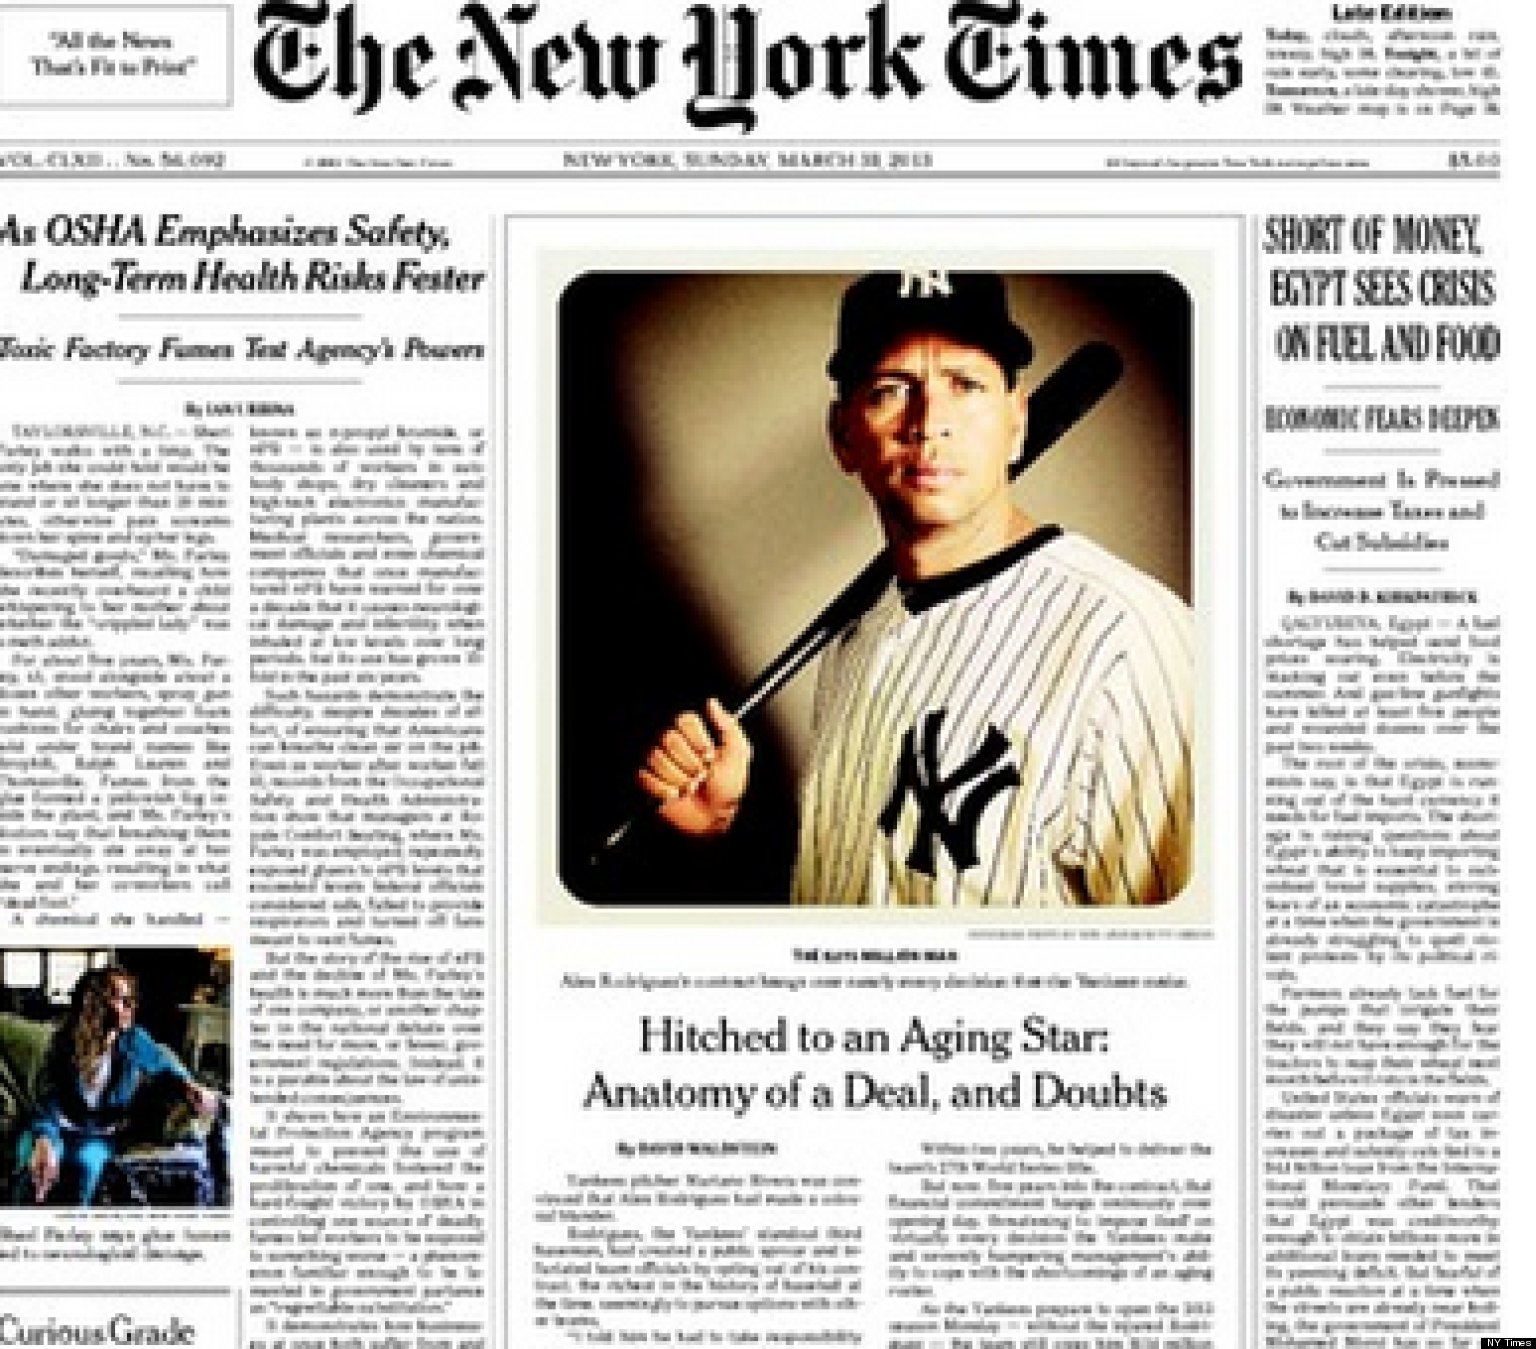 NY Times Runs Instagram Photo On Front Page (PHOTO)  HuffPost